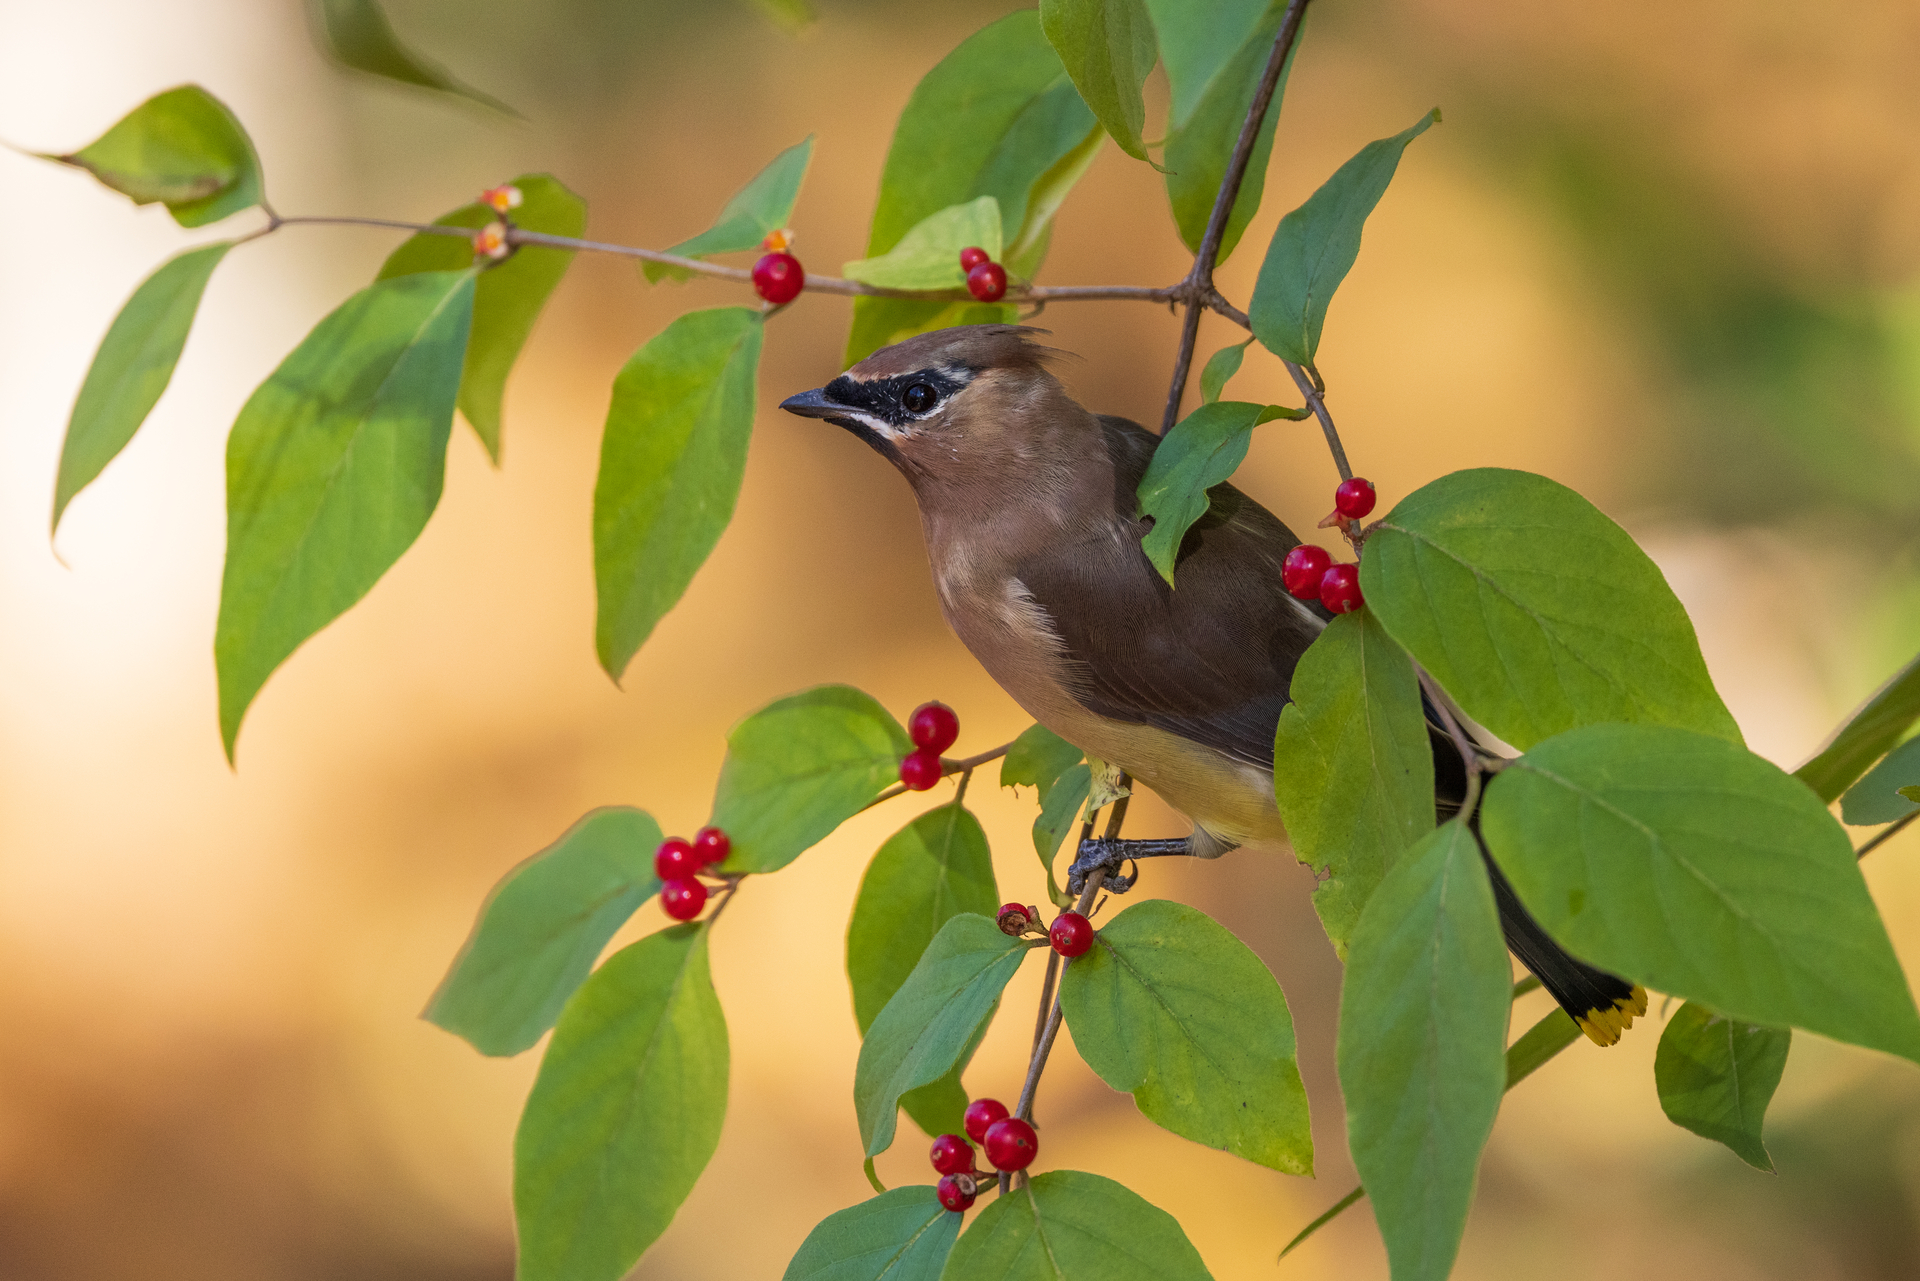 Cedar Waxwing perched in branch with berries